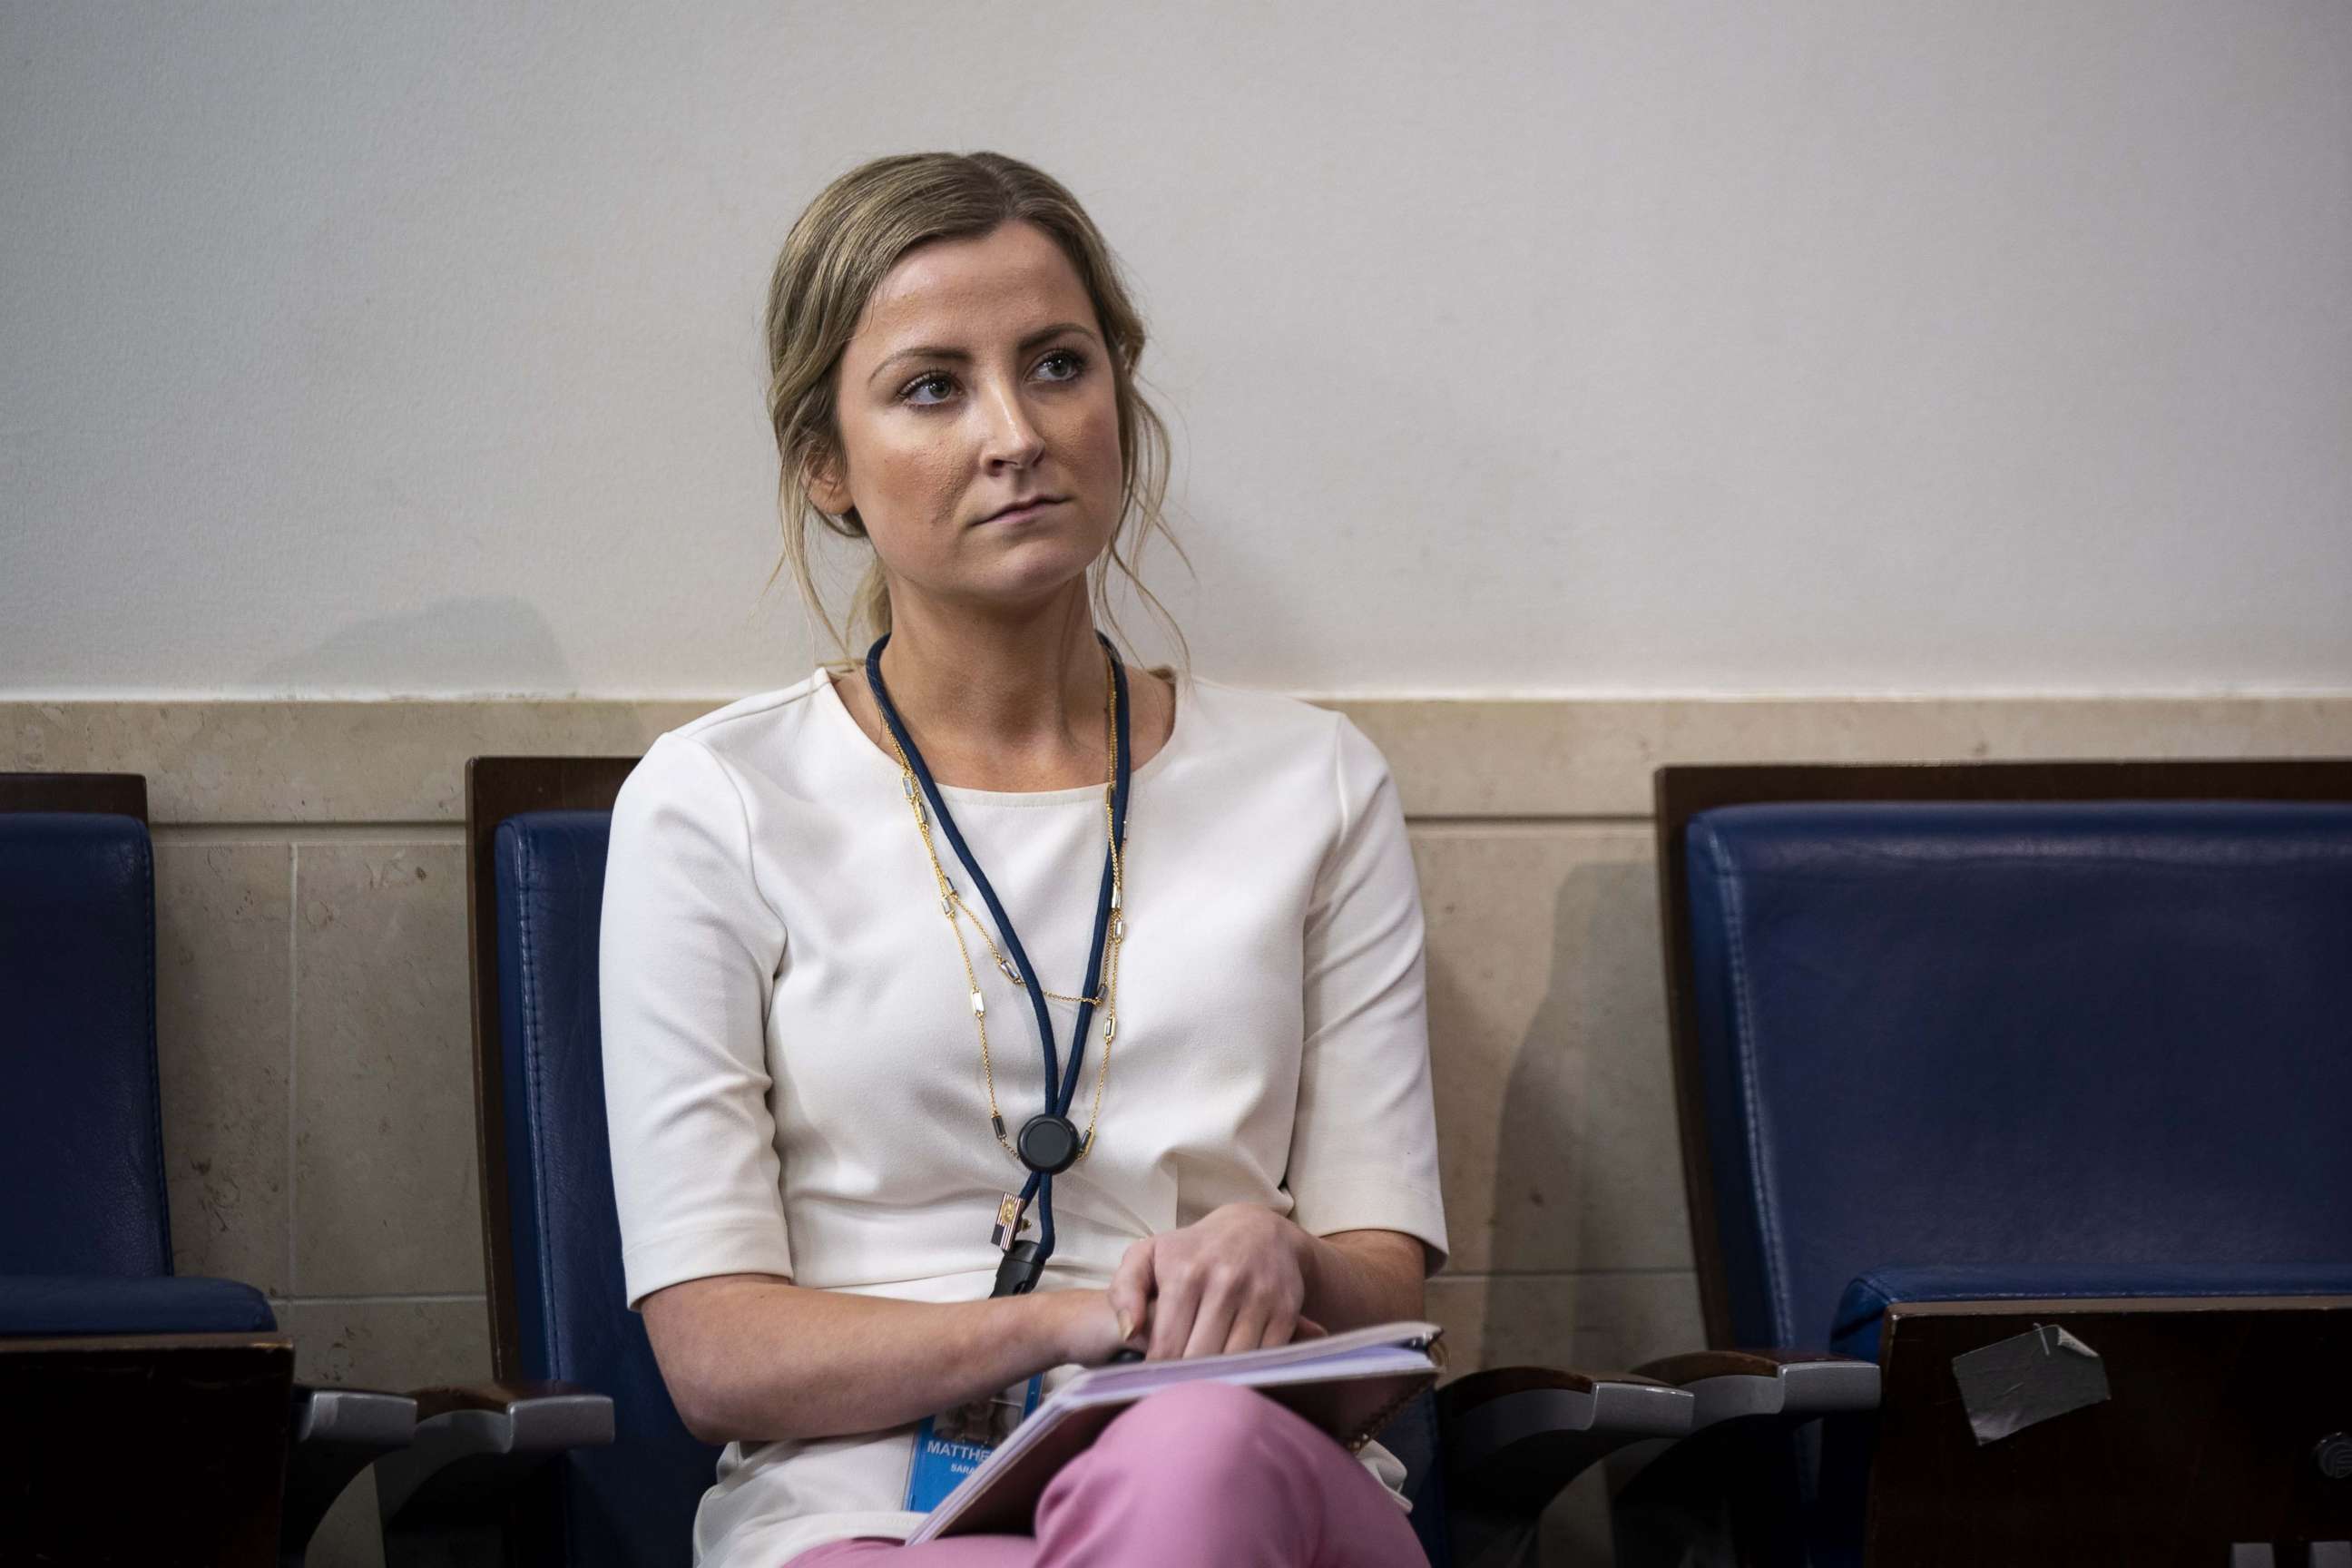 PHOTO: Sarah Matthews, White House deputy press secretary, listens during a news conference at the White House in Washington, D.C., July 8, 2020.